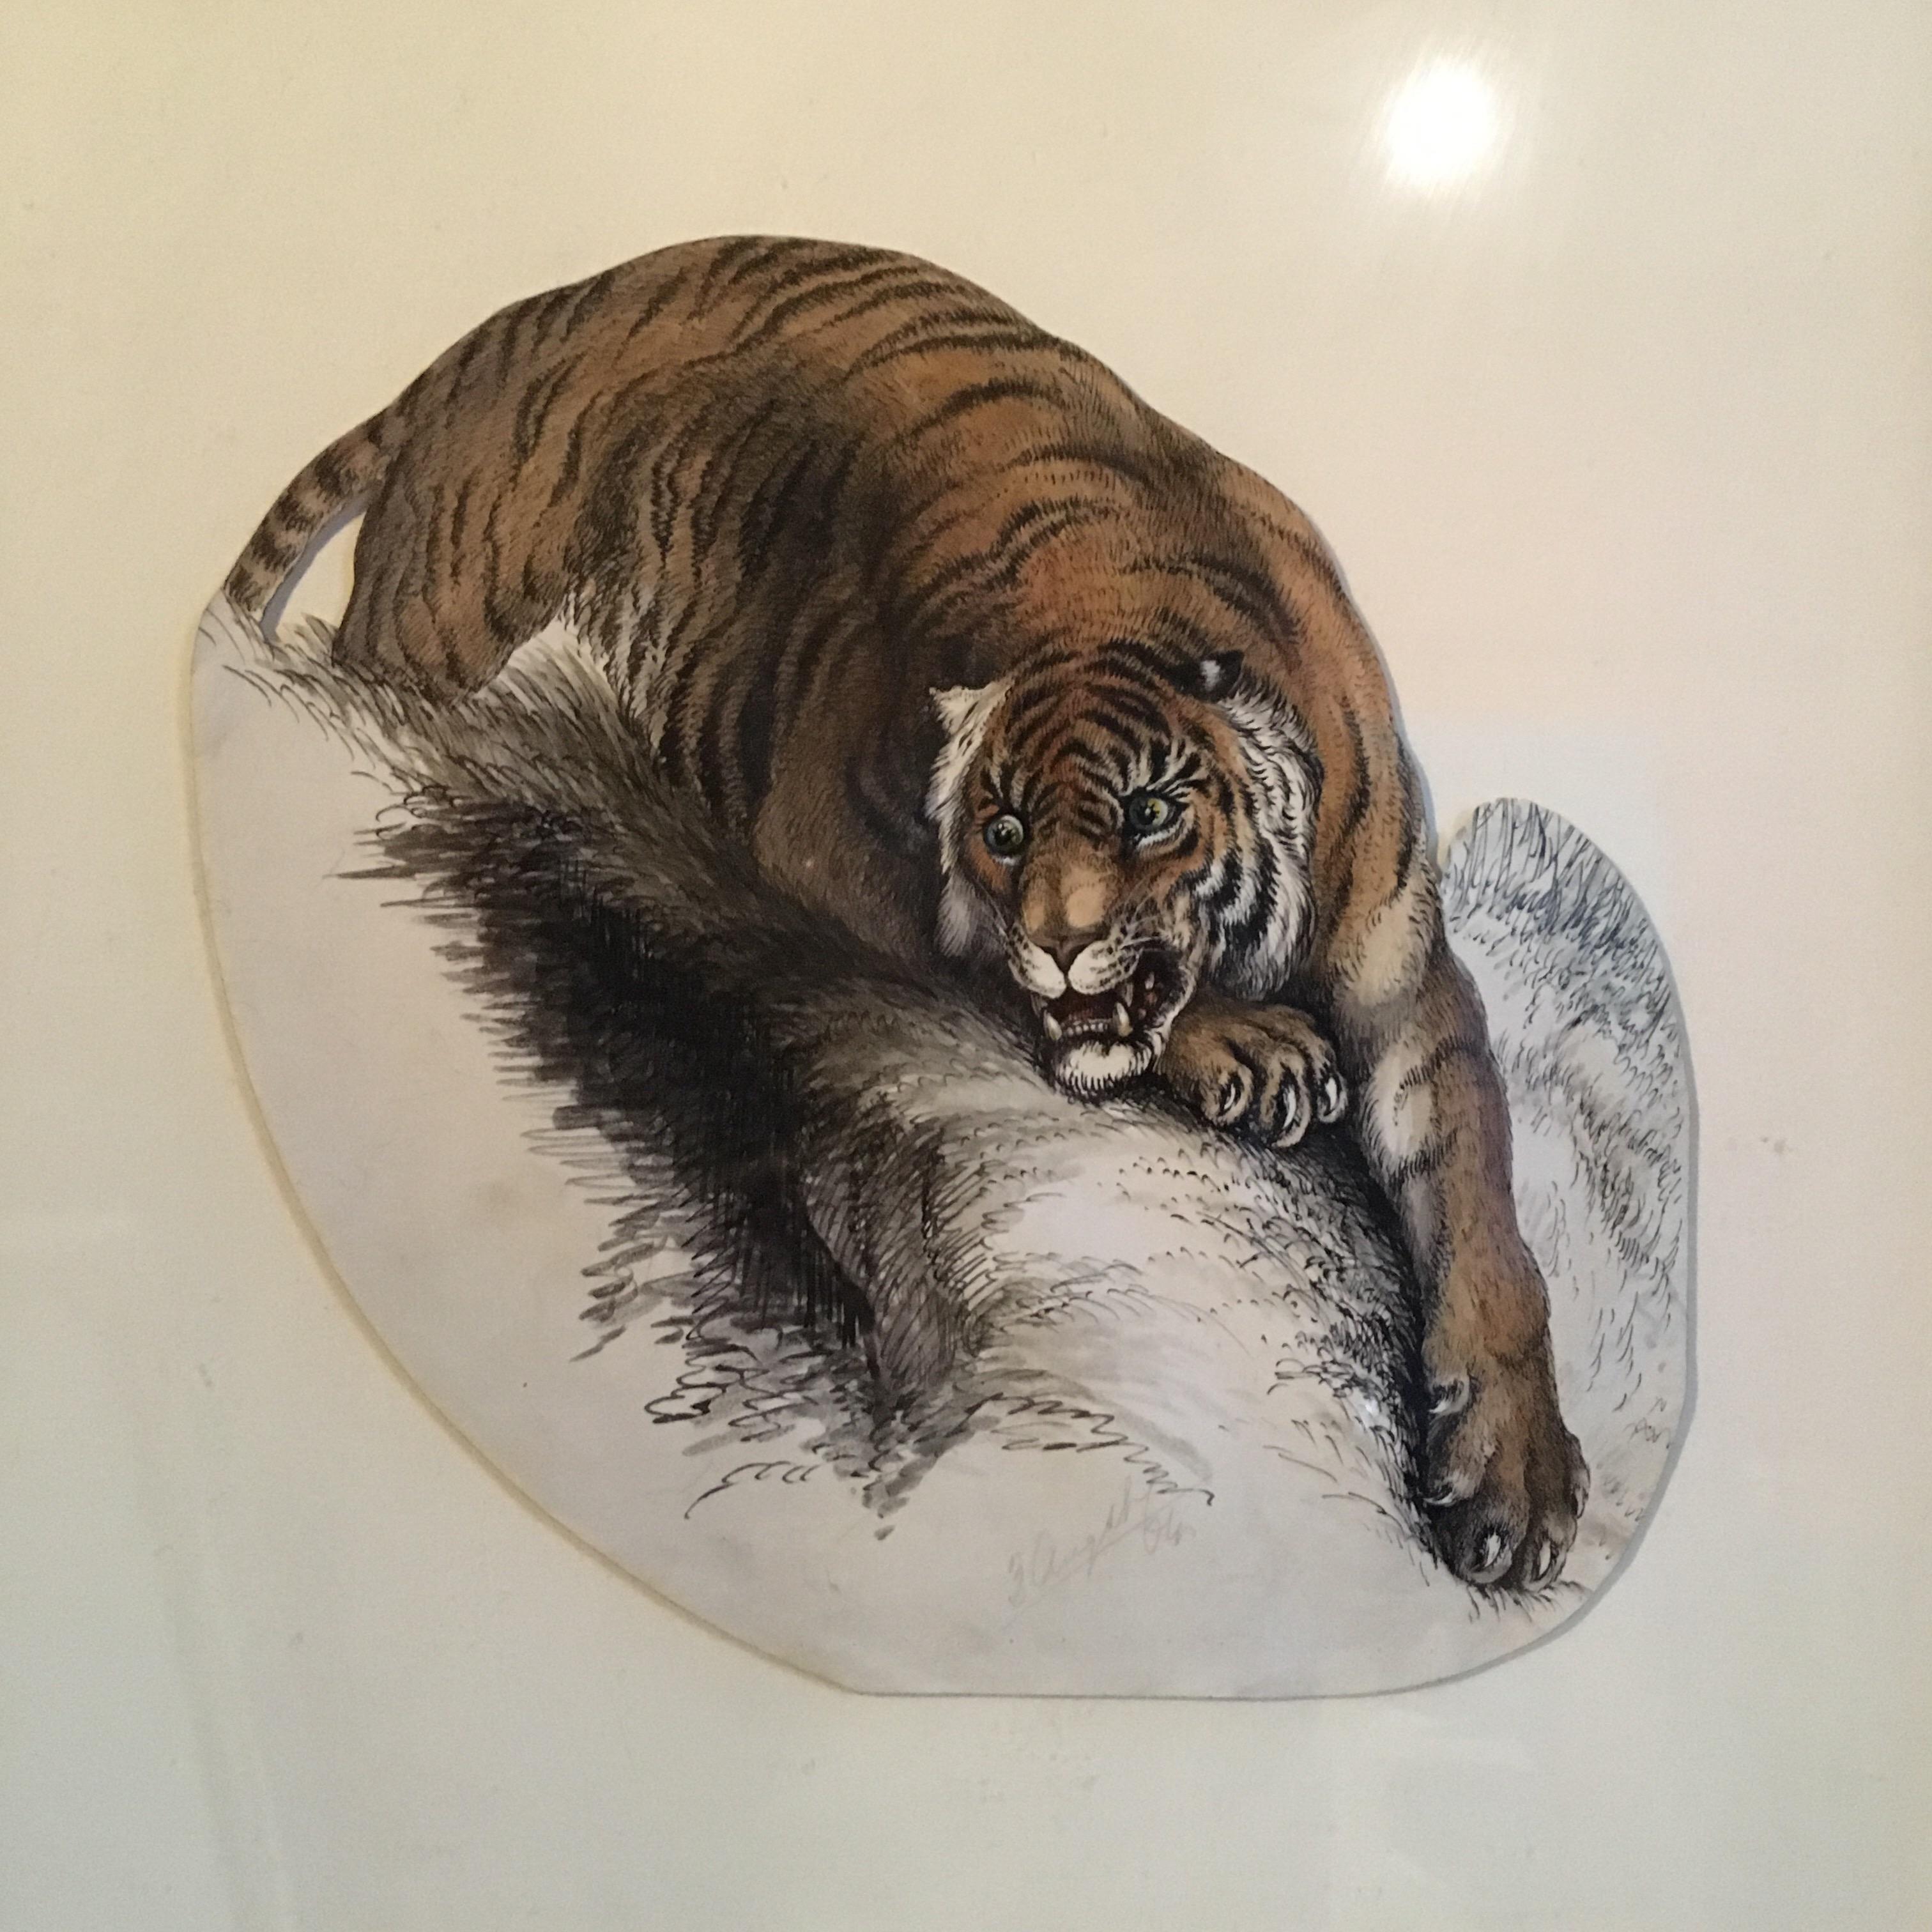 Tiger Painting, Antique Watercolour, British Artist, Signed and Dated
By British artist, early 20th Century
Signed and dated '04 indistinctly underneath the tiger
Watercolour and Pencil, cut out and attached to board, framed
Framed size: 17.5 x 17